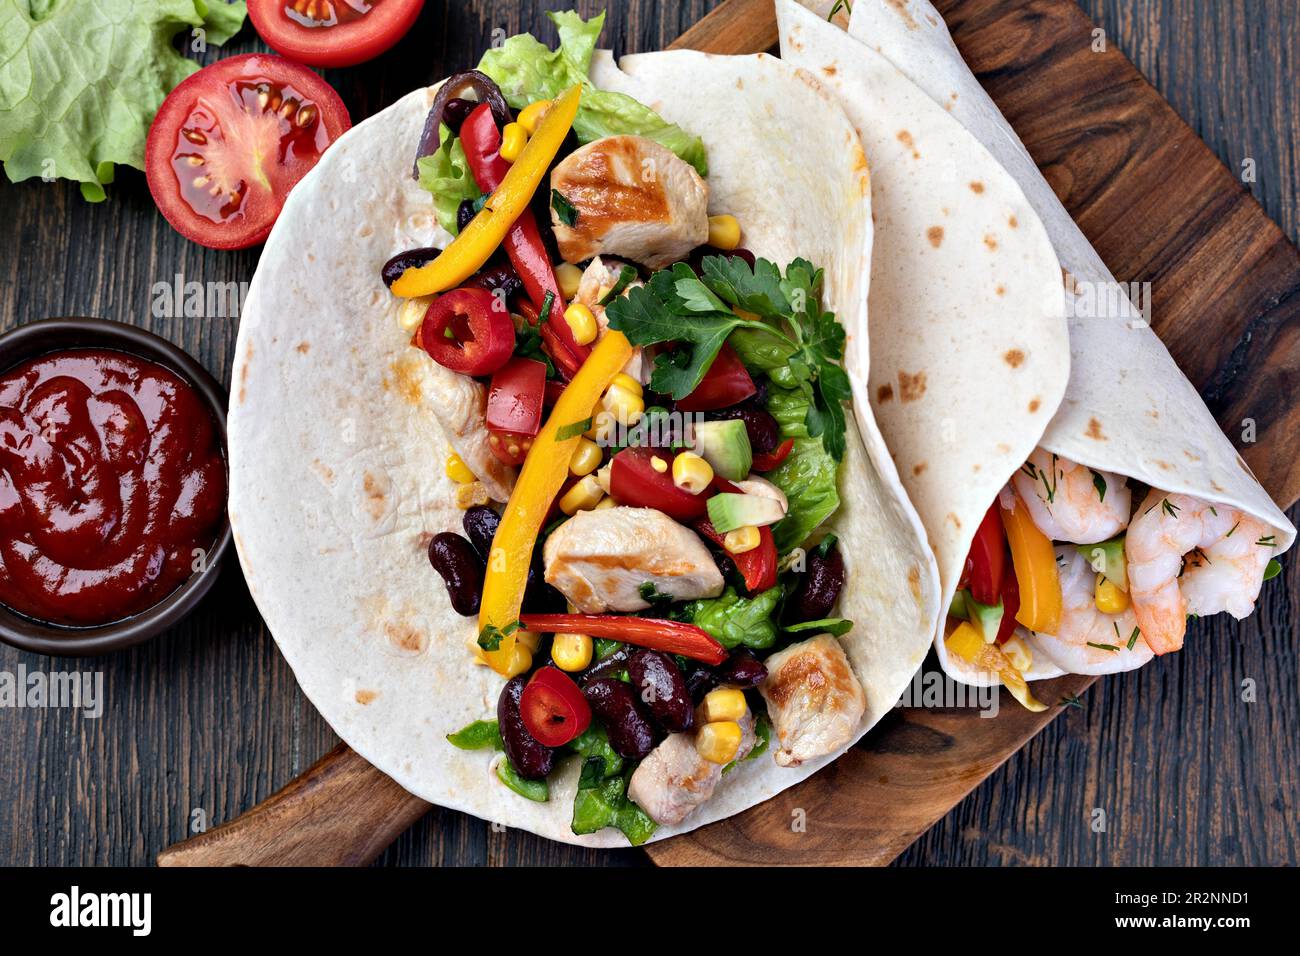 burrito with vegetables and tortilla on a wooden table Stock Photo